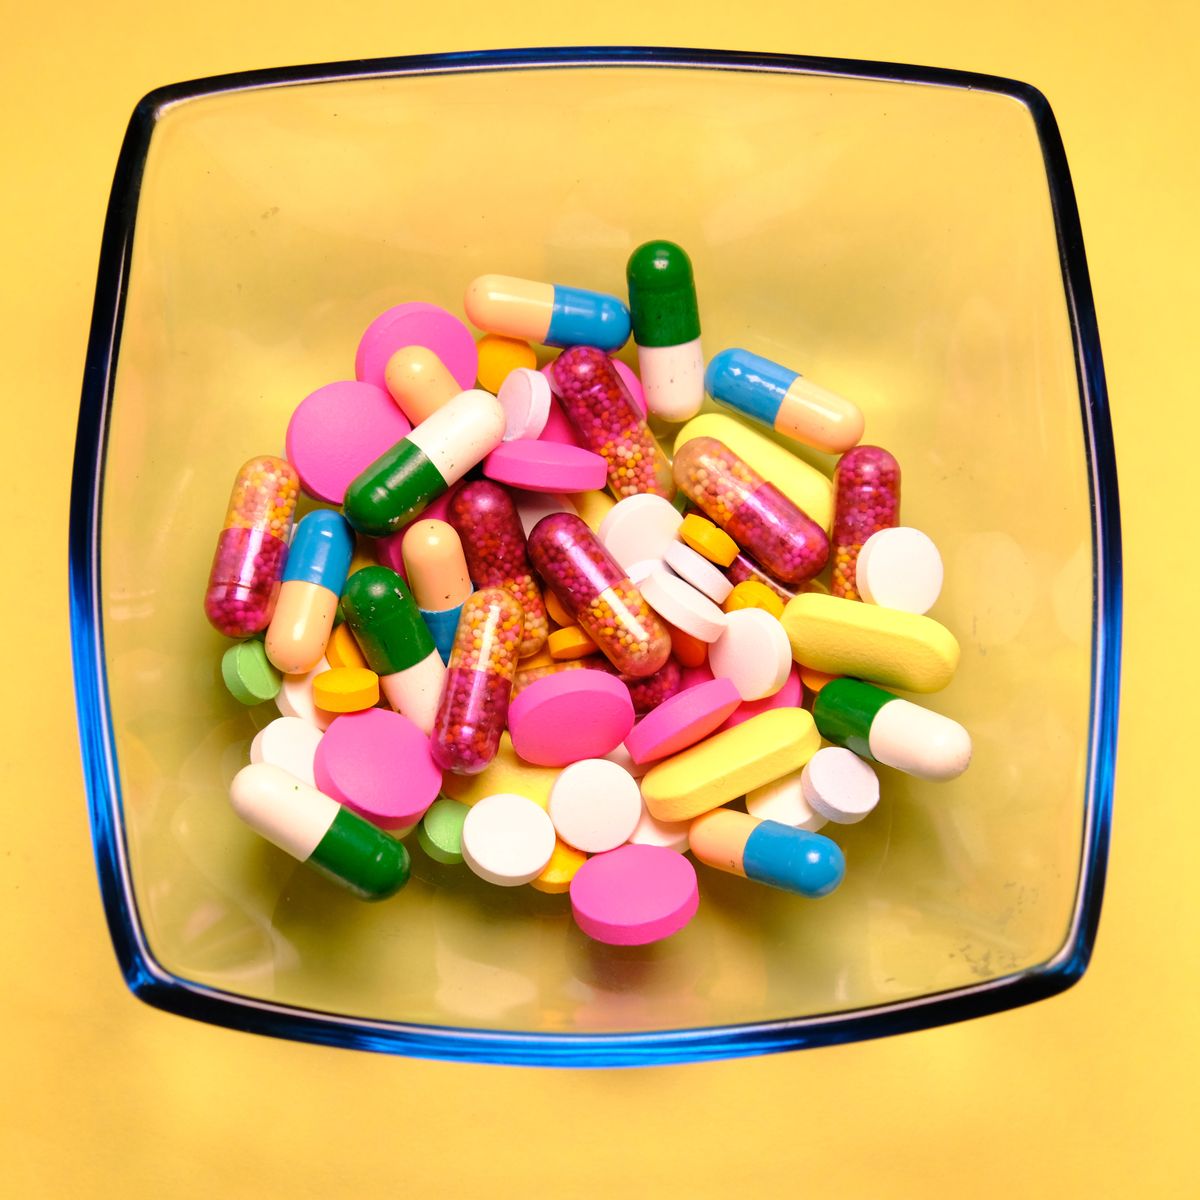 pharmaceutical medicine pills, tablets and capsules in bowl on yellow background